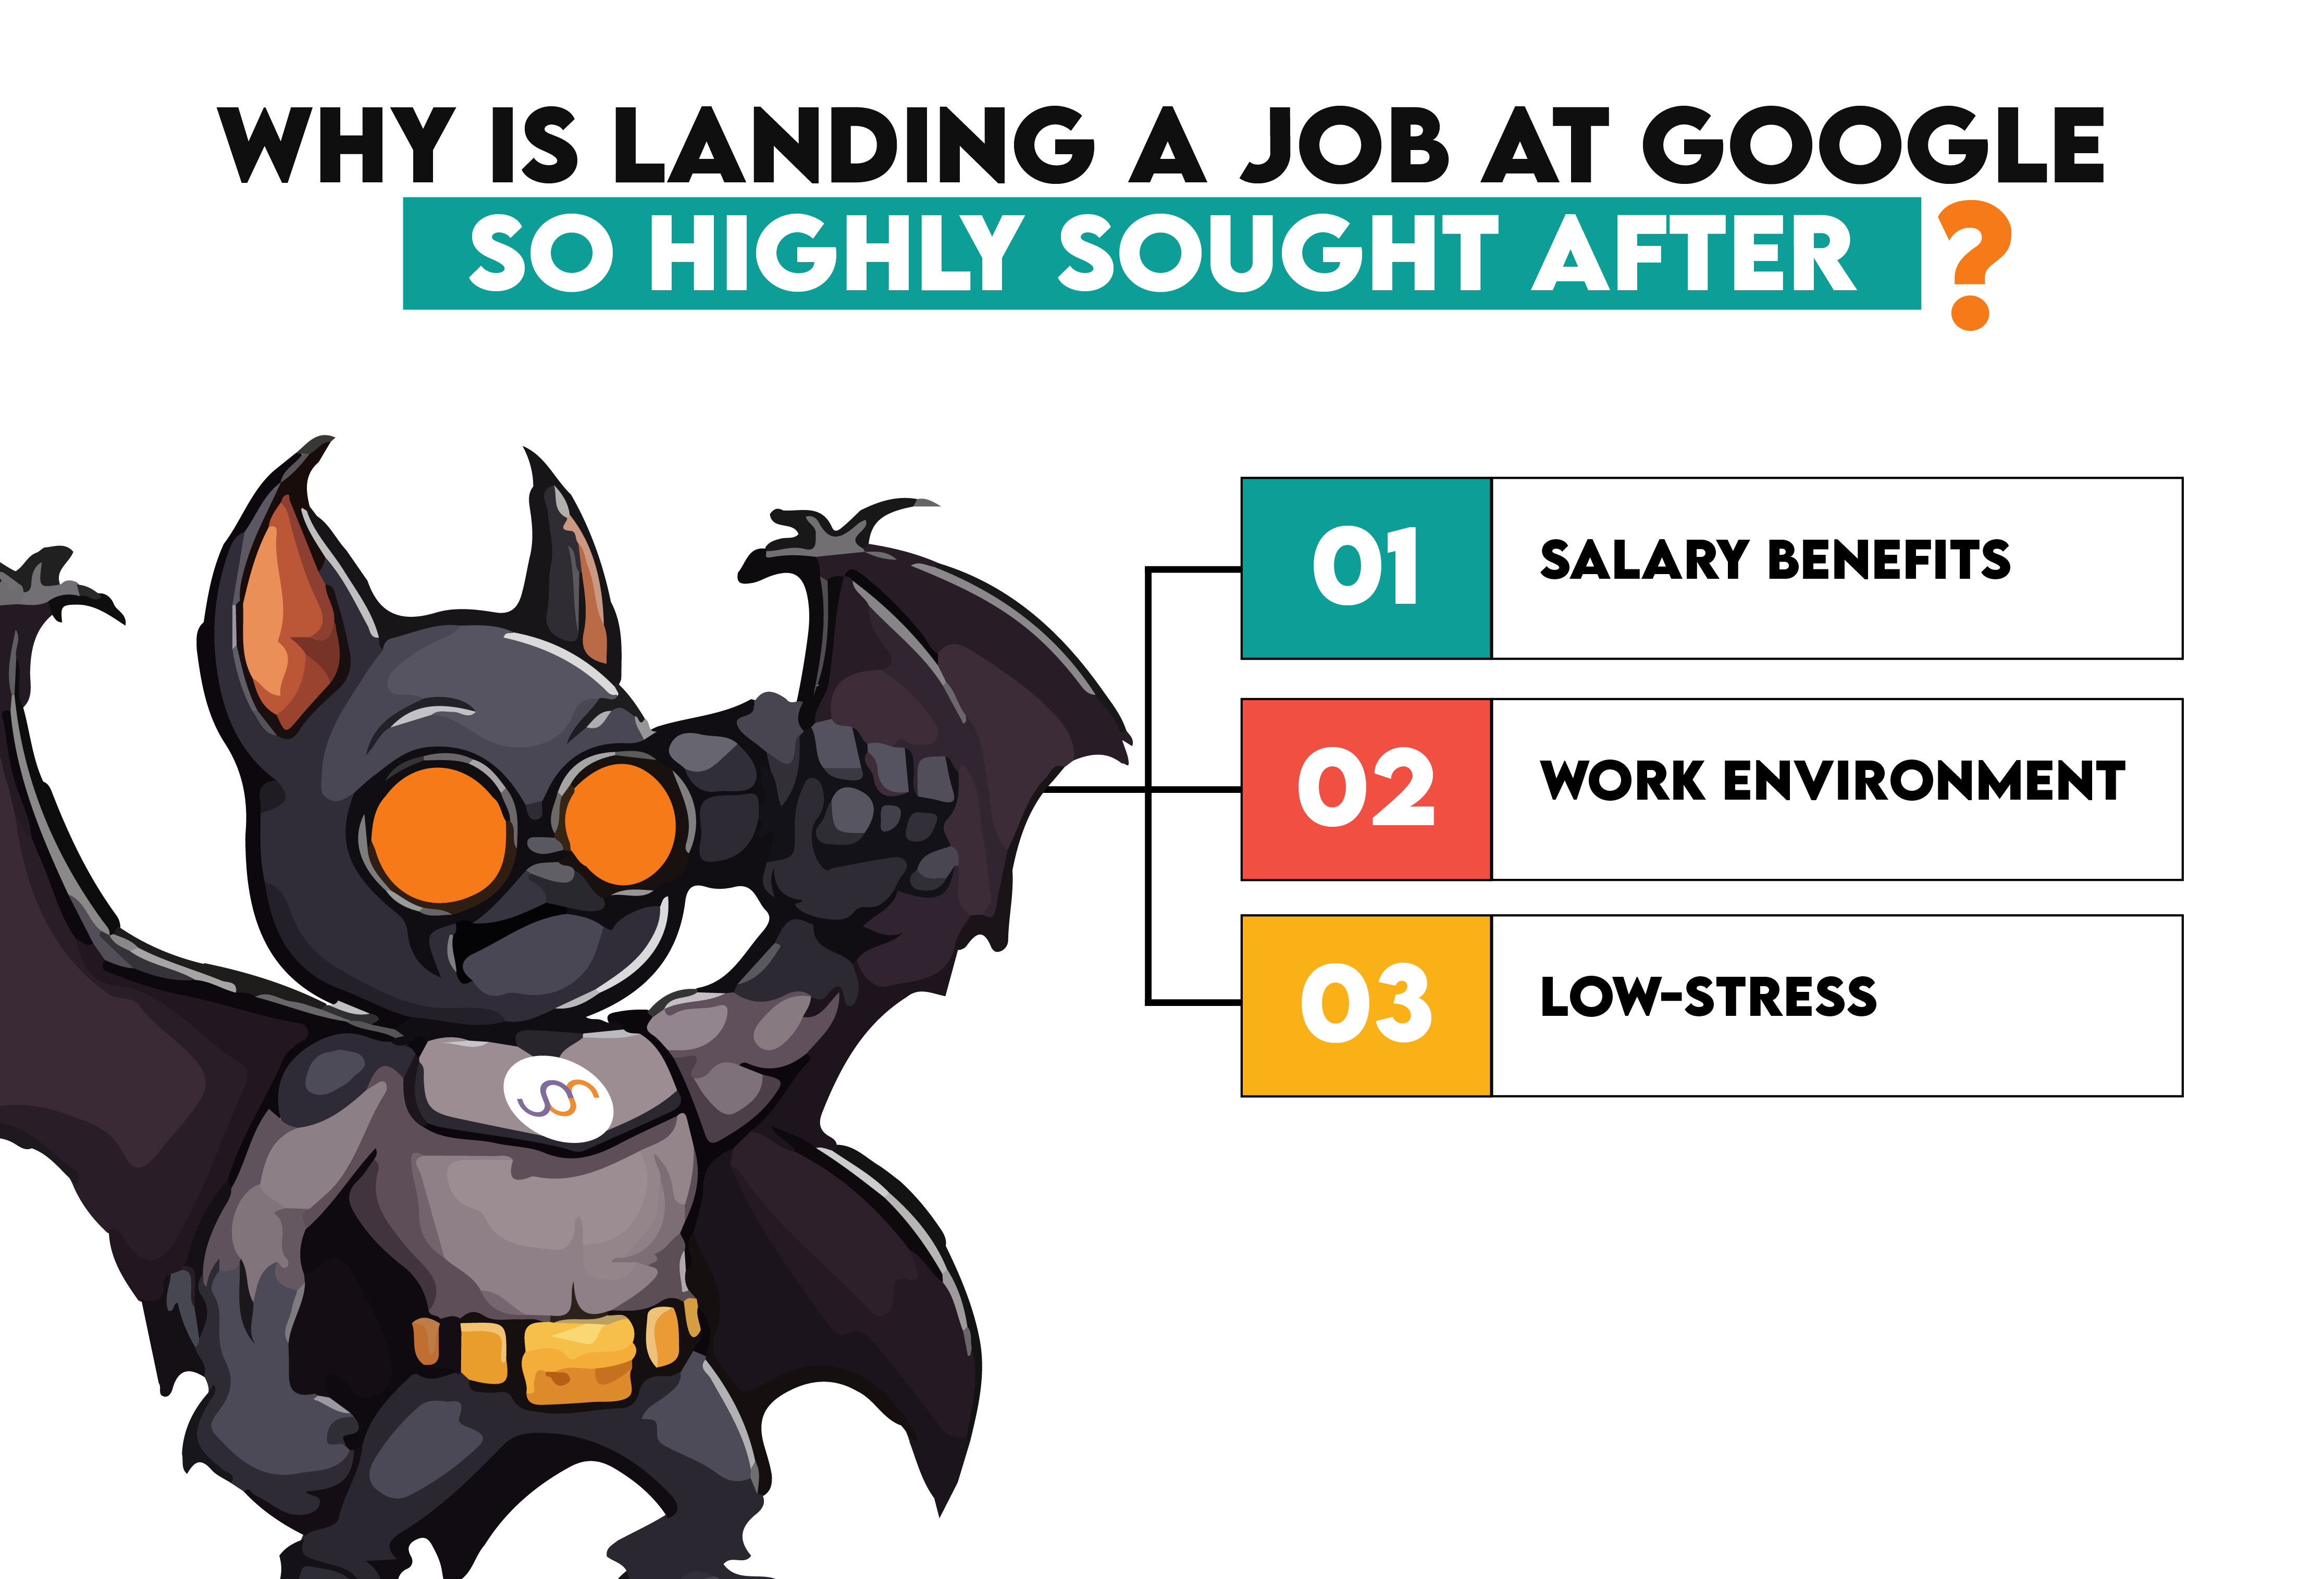 Why is landing a data engineer job at Google so highly sought after